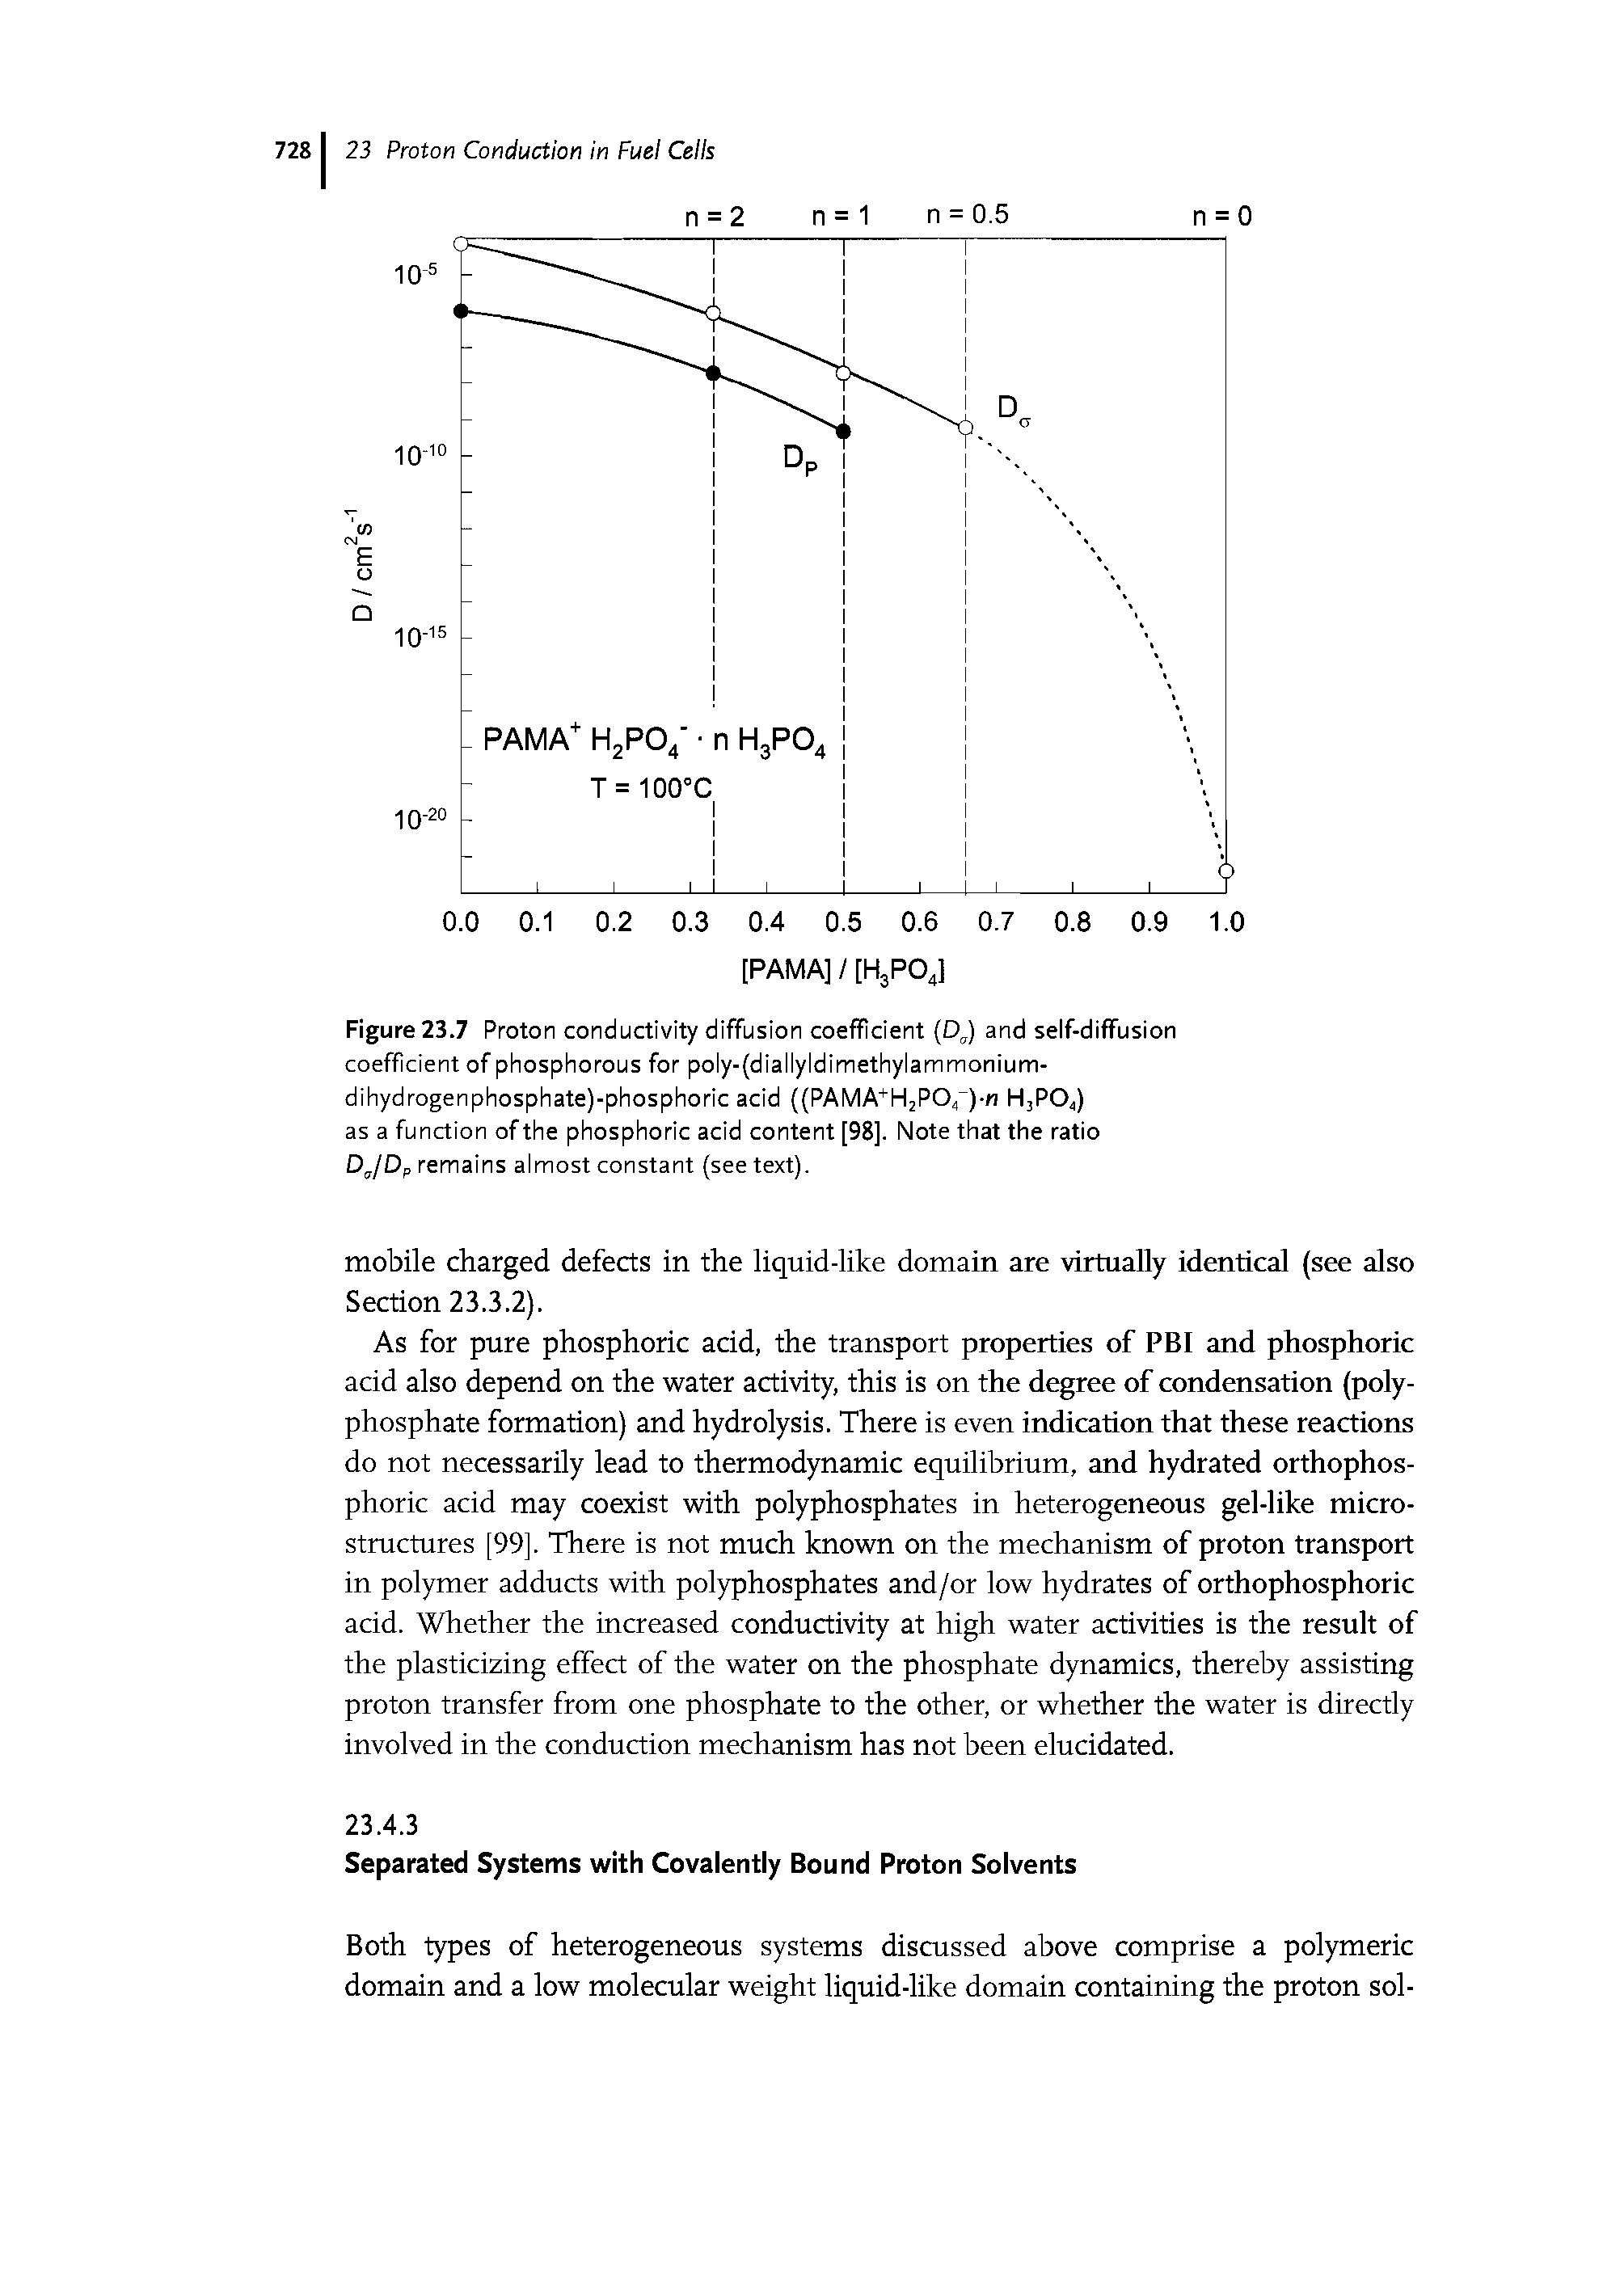 Figure 23.7 Proton conductivity diffusion coefficient (DJ and self-diffusion coefRcient of phosphorous for poly-(diallyldimethylammonium-dihydrogenphosphate)-phosphoric acid ((PAMA+H2P04 )-n H3PO4) as a function of the phosphoric acid content [98]. Note that the ratio DJDp remains almost constant (see text).